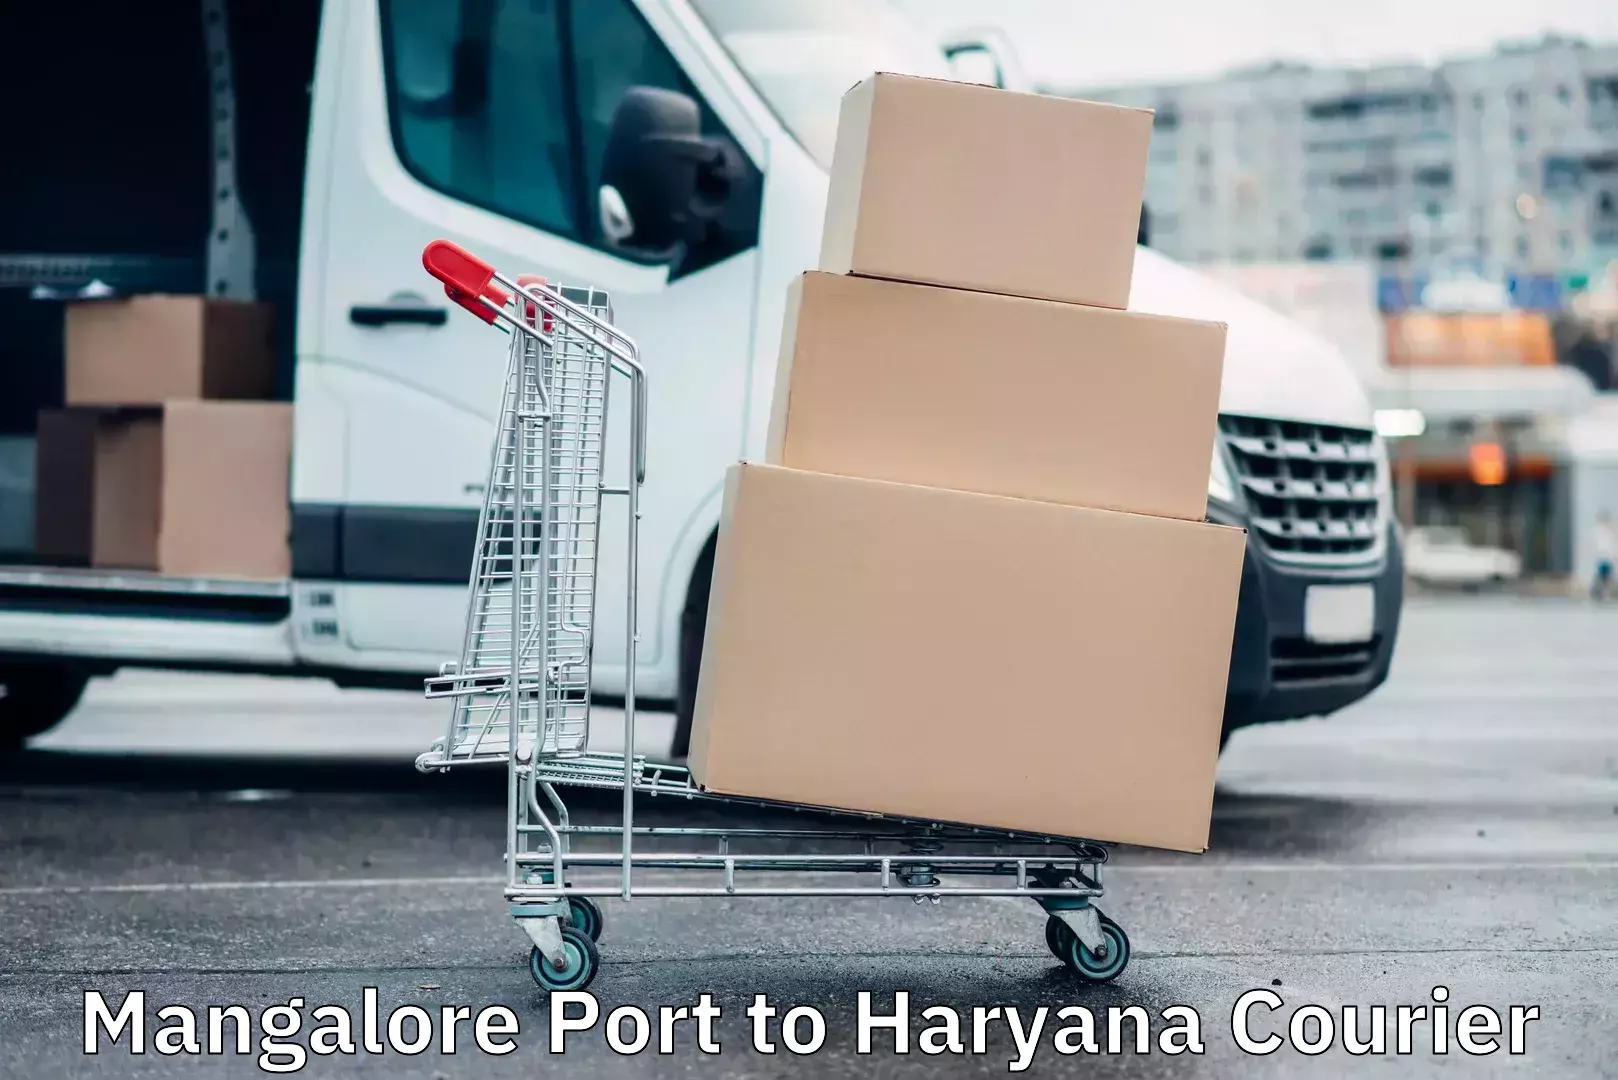 Multi-national courier services Mangalore Port to Haryana